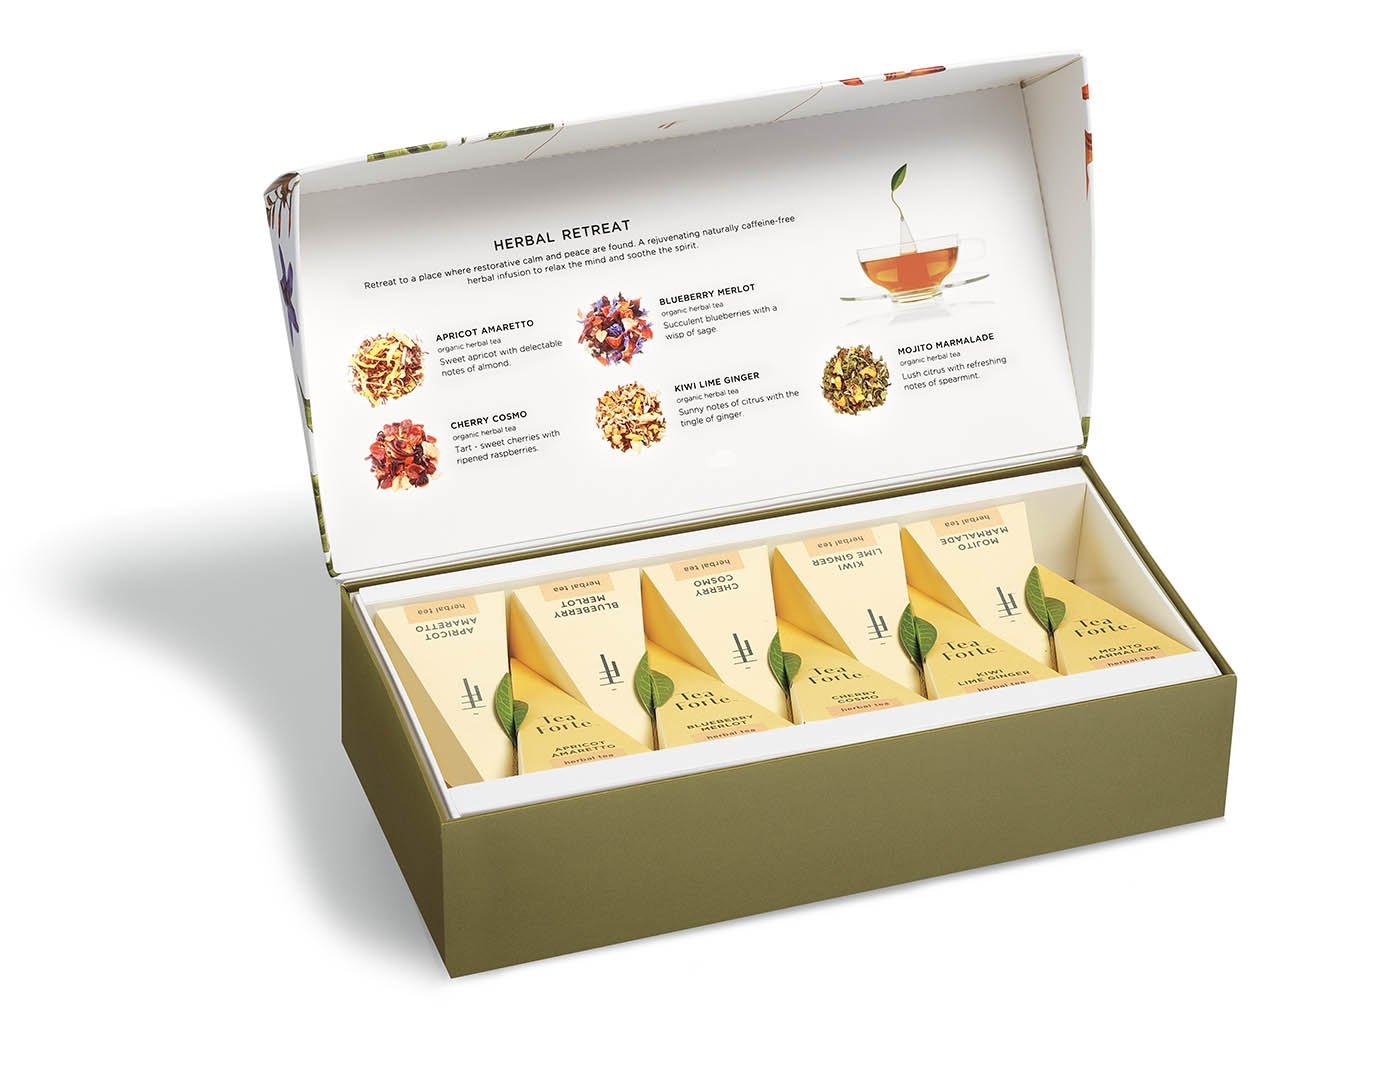 Herbal Retreat Collection Tea Forte